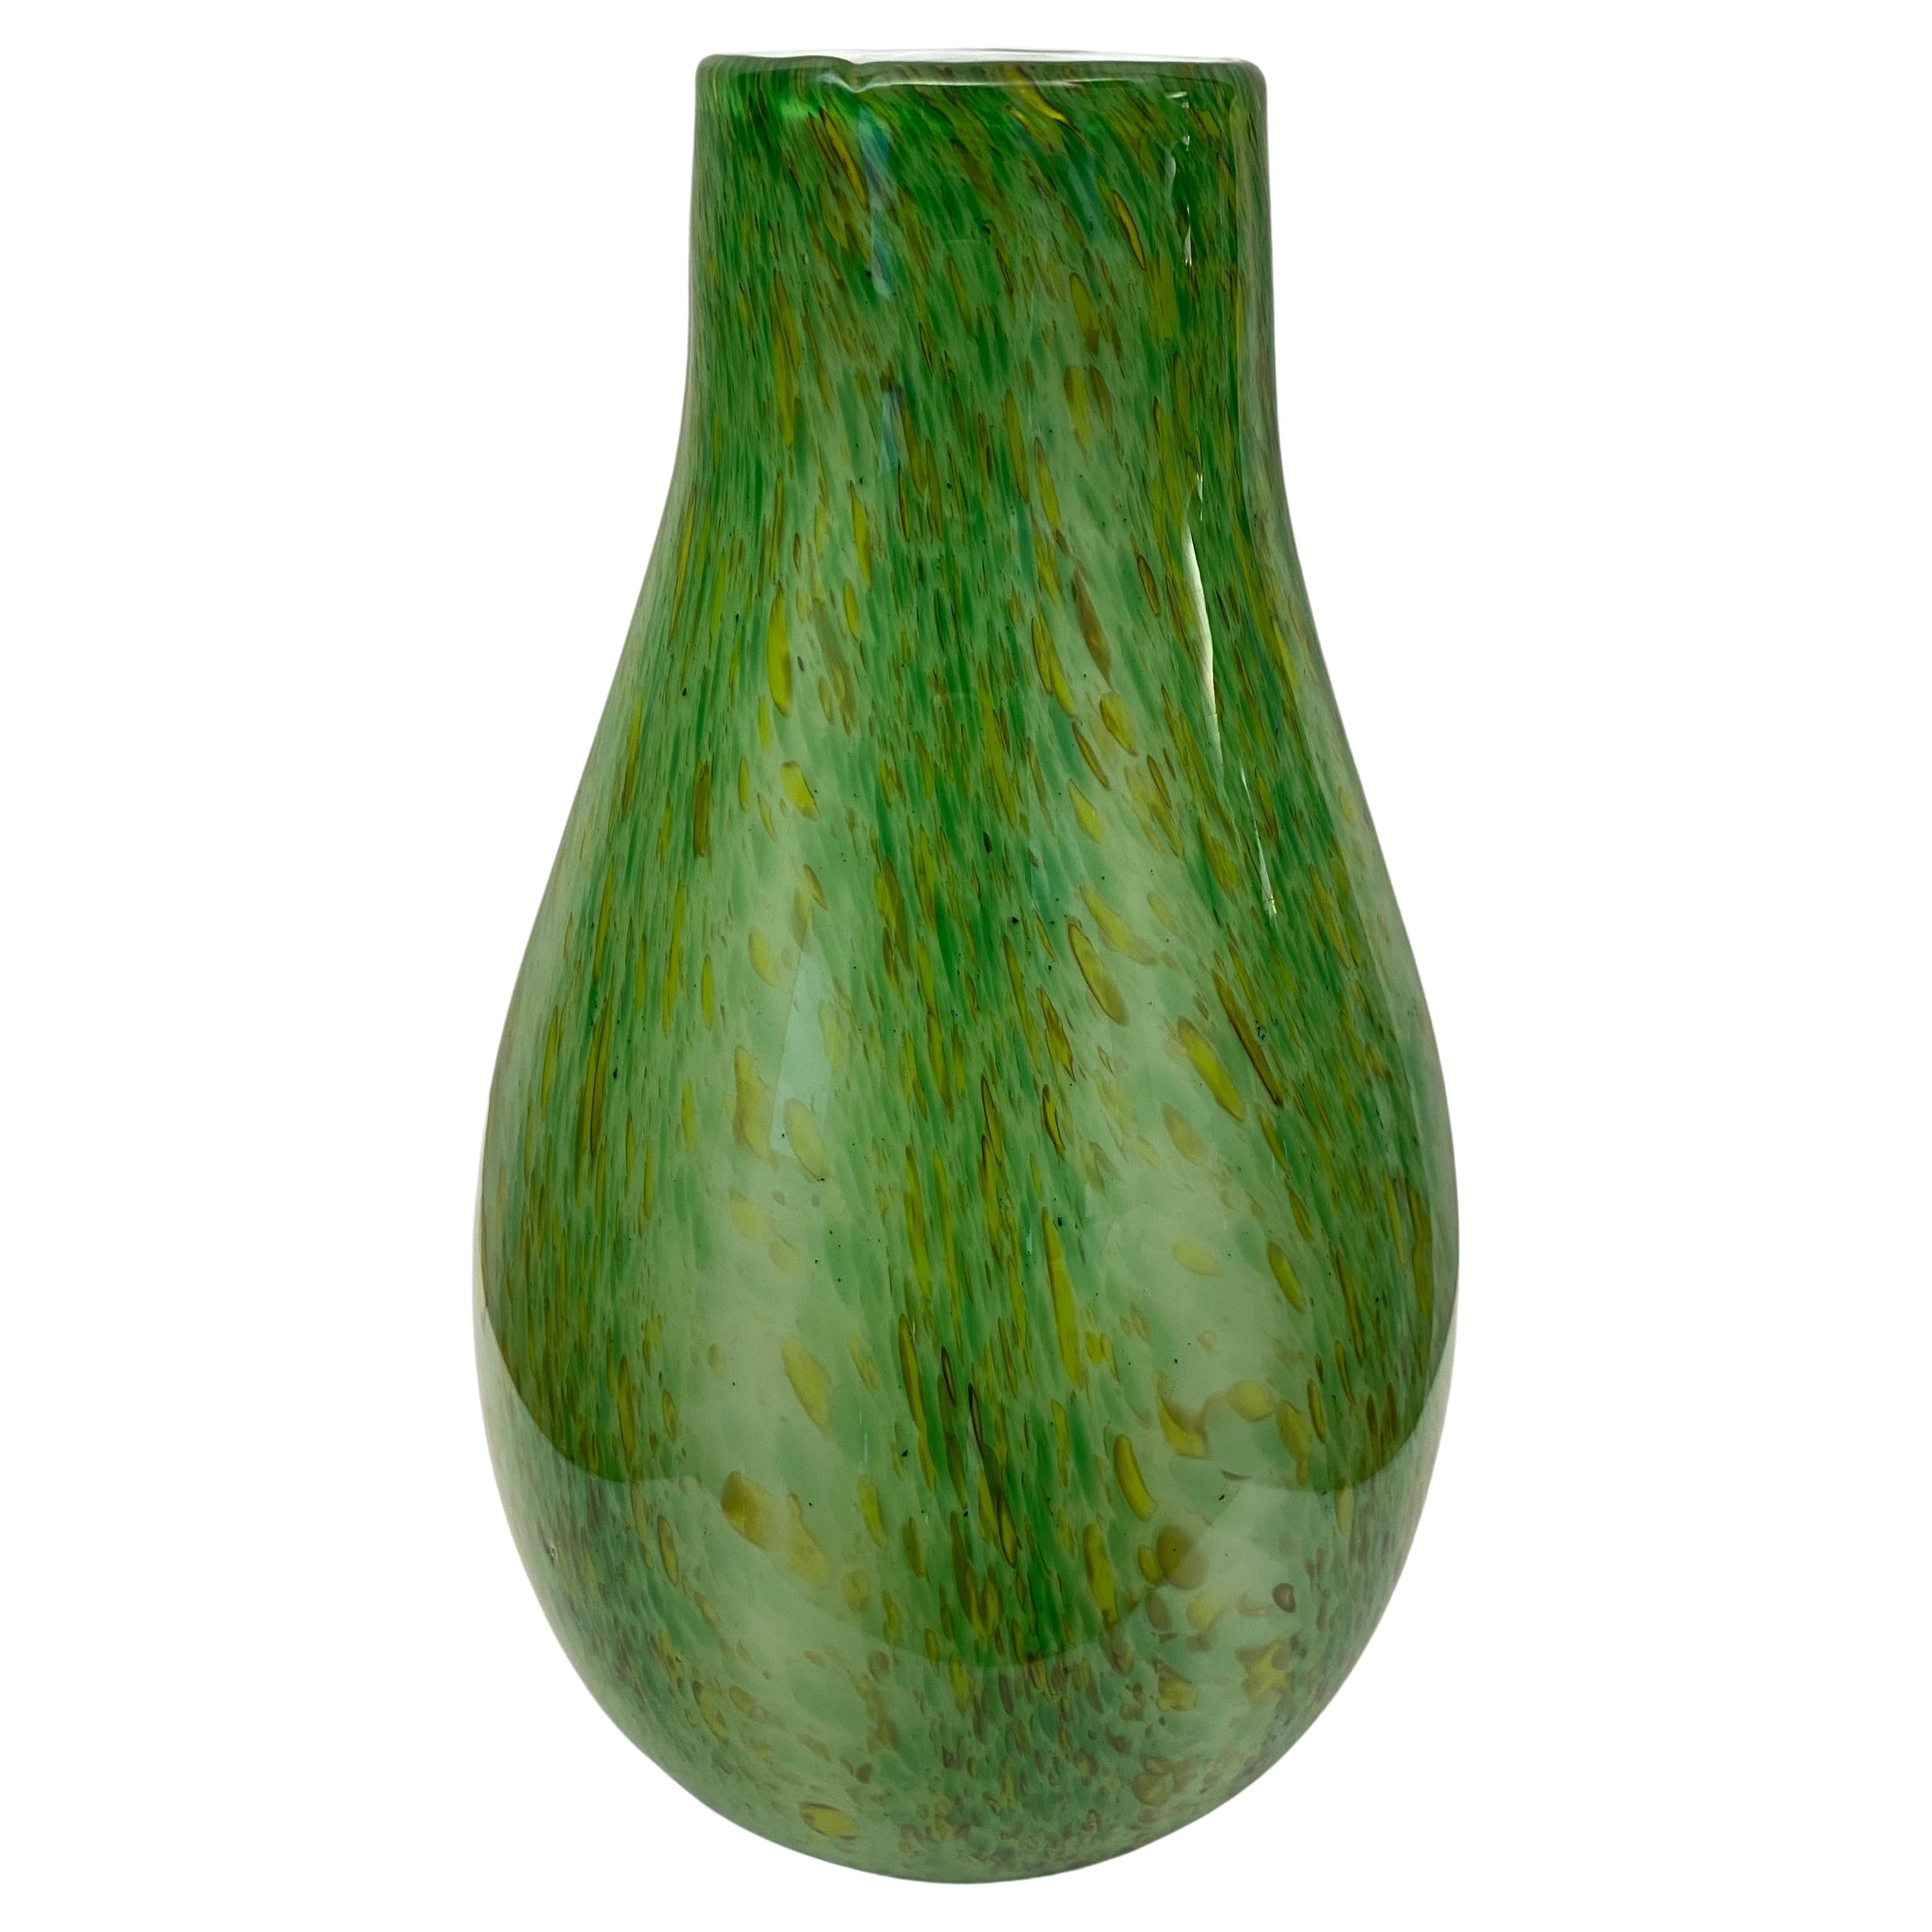 What are the characteristics of Murano glass?